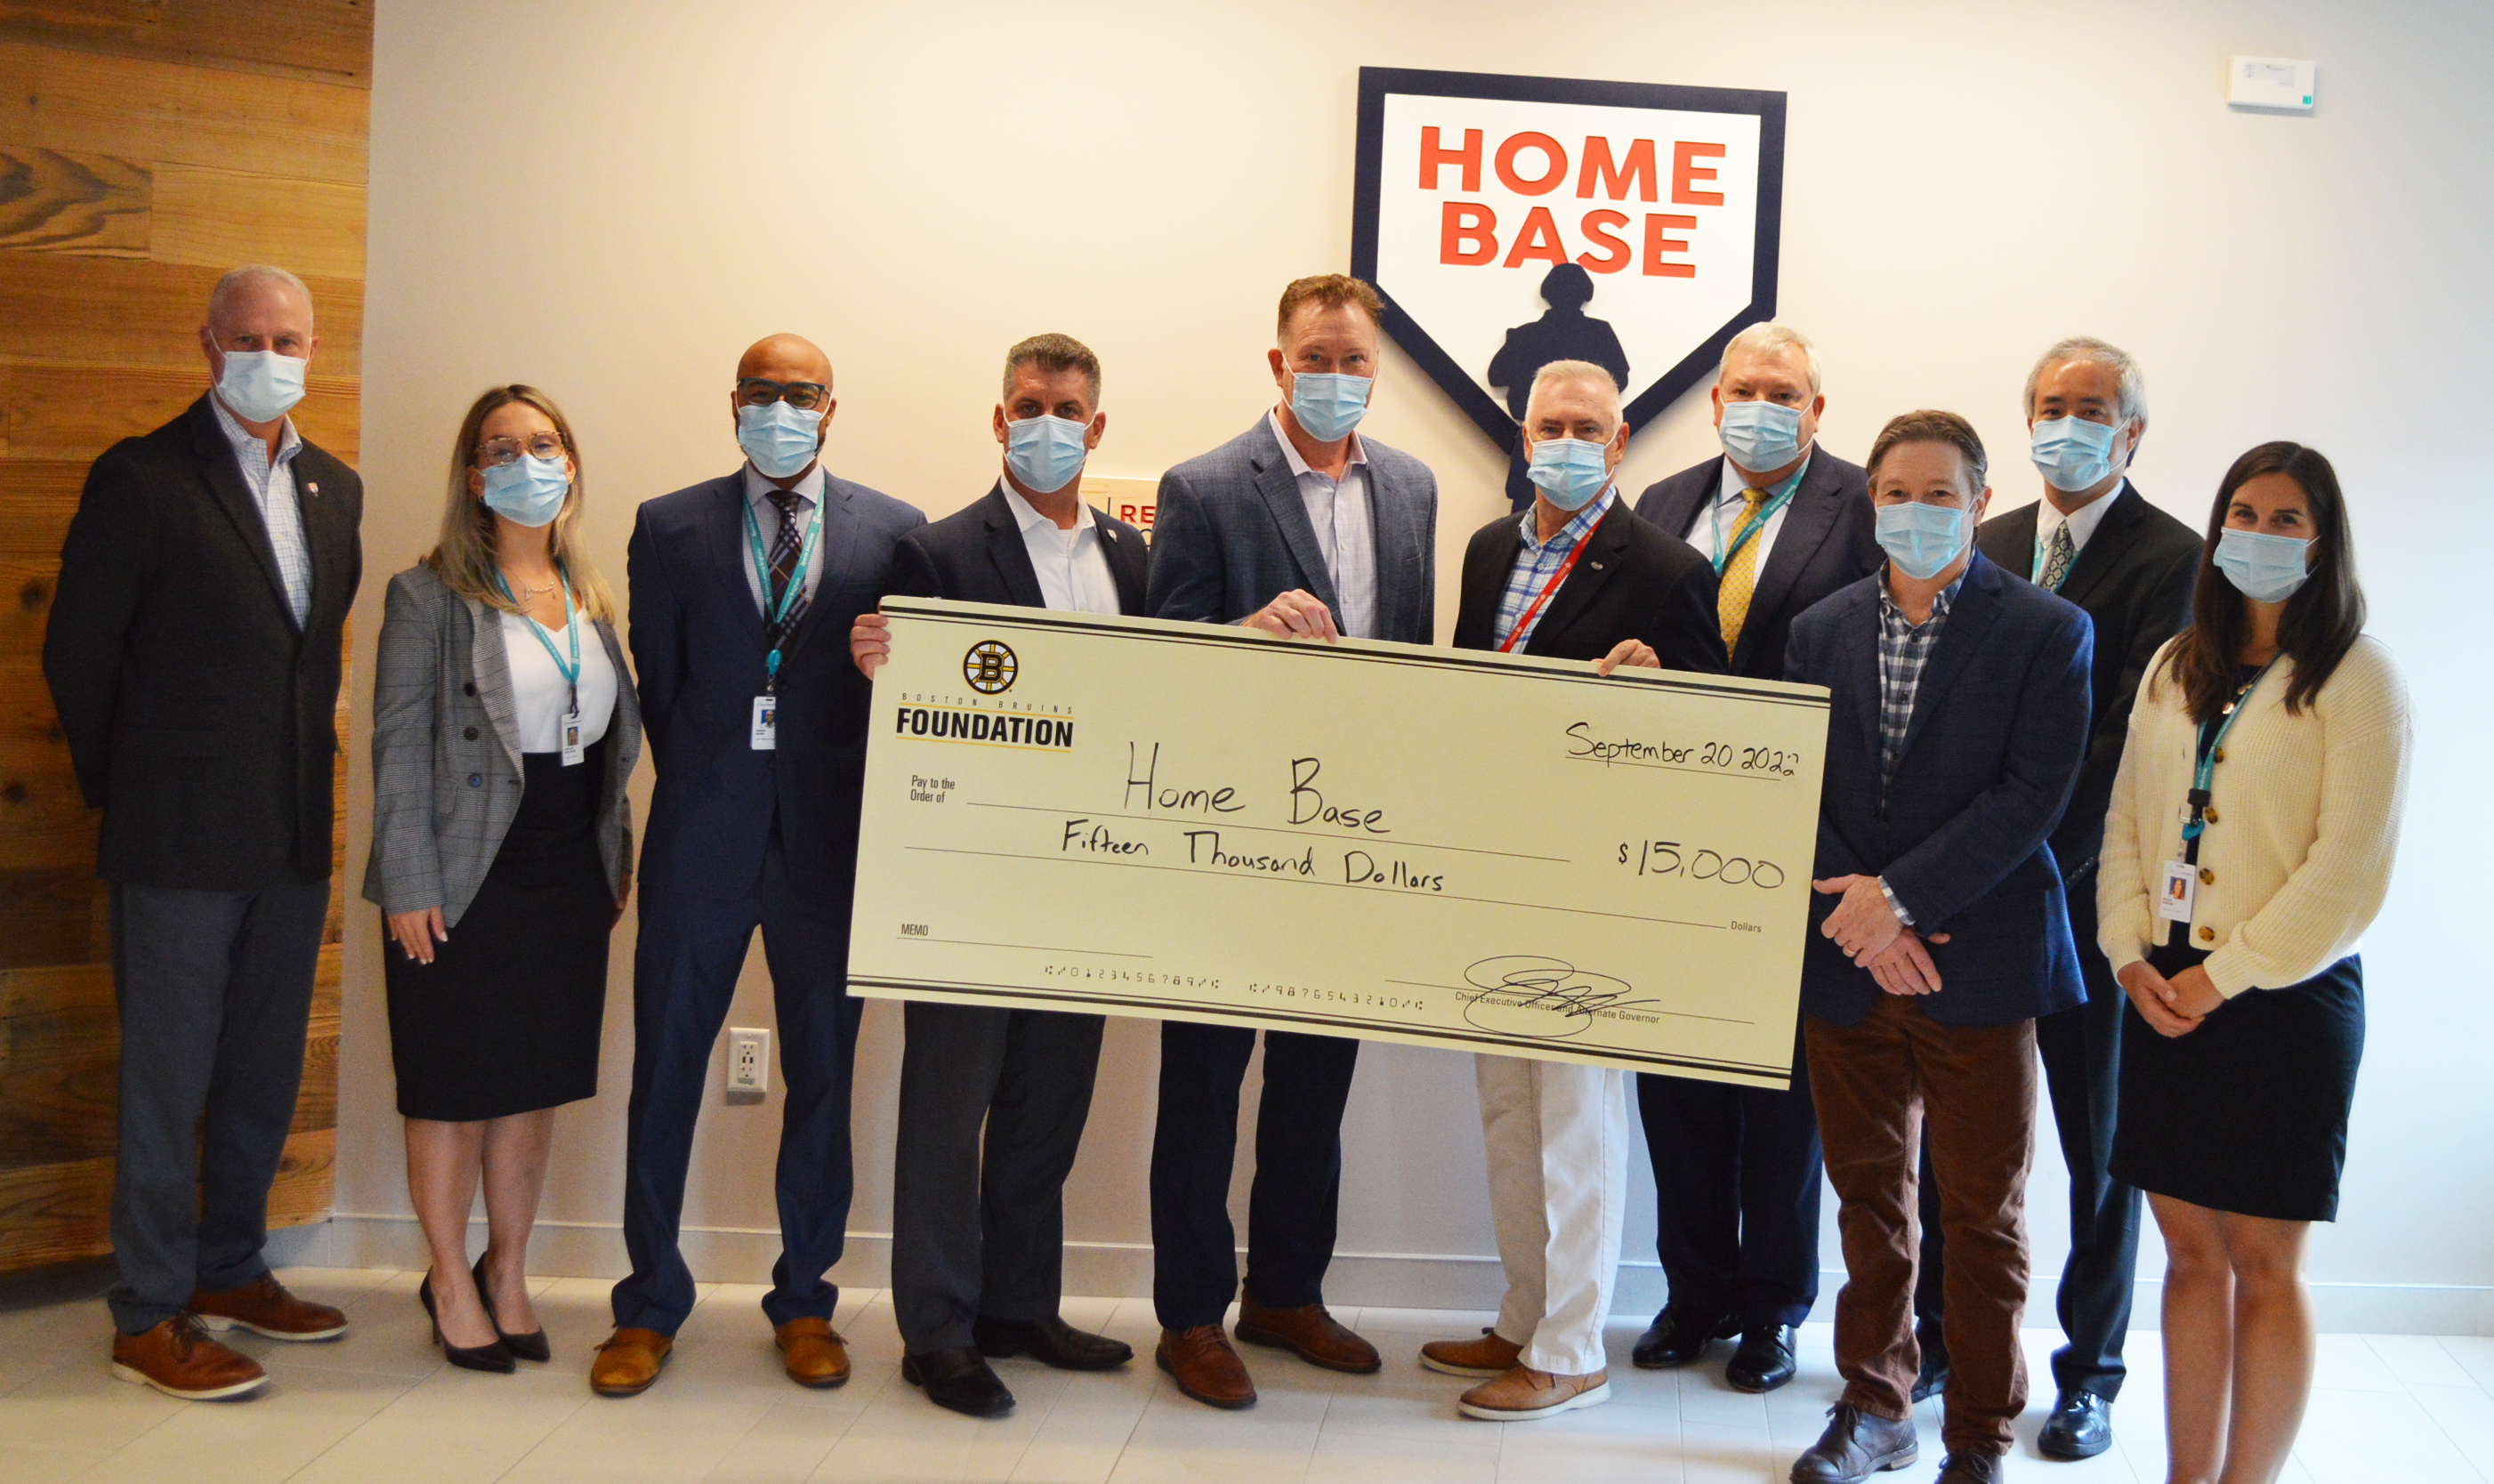 Bruins Foundation Partners with Mass General Brigham Sports Medicine to Support Home Base Veteran and Family Care